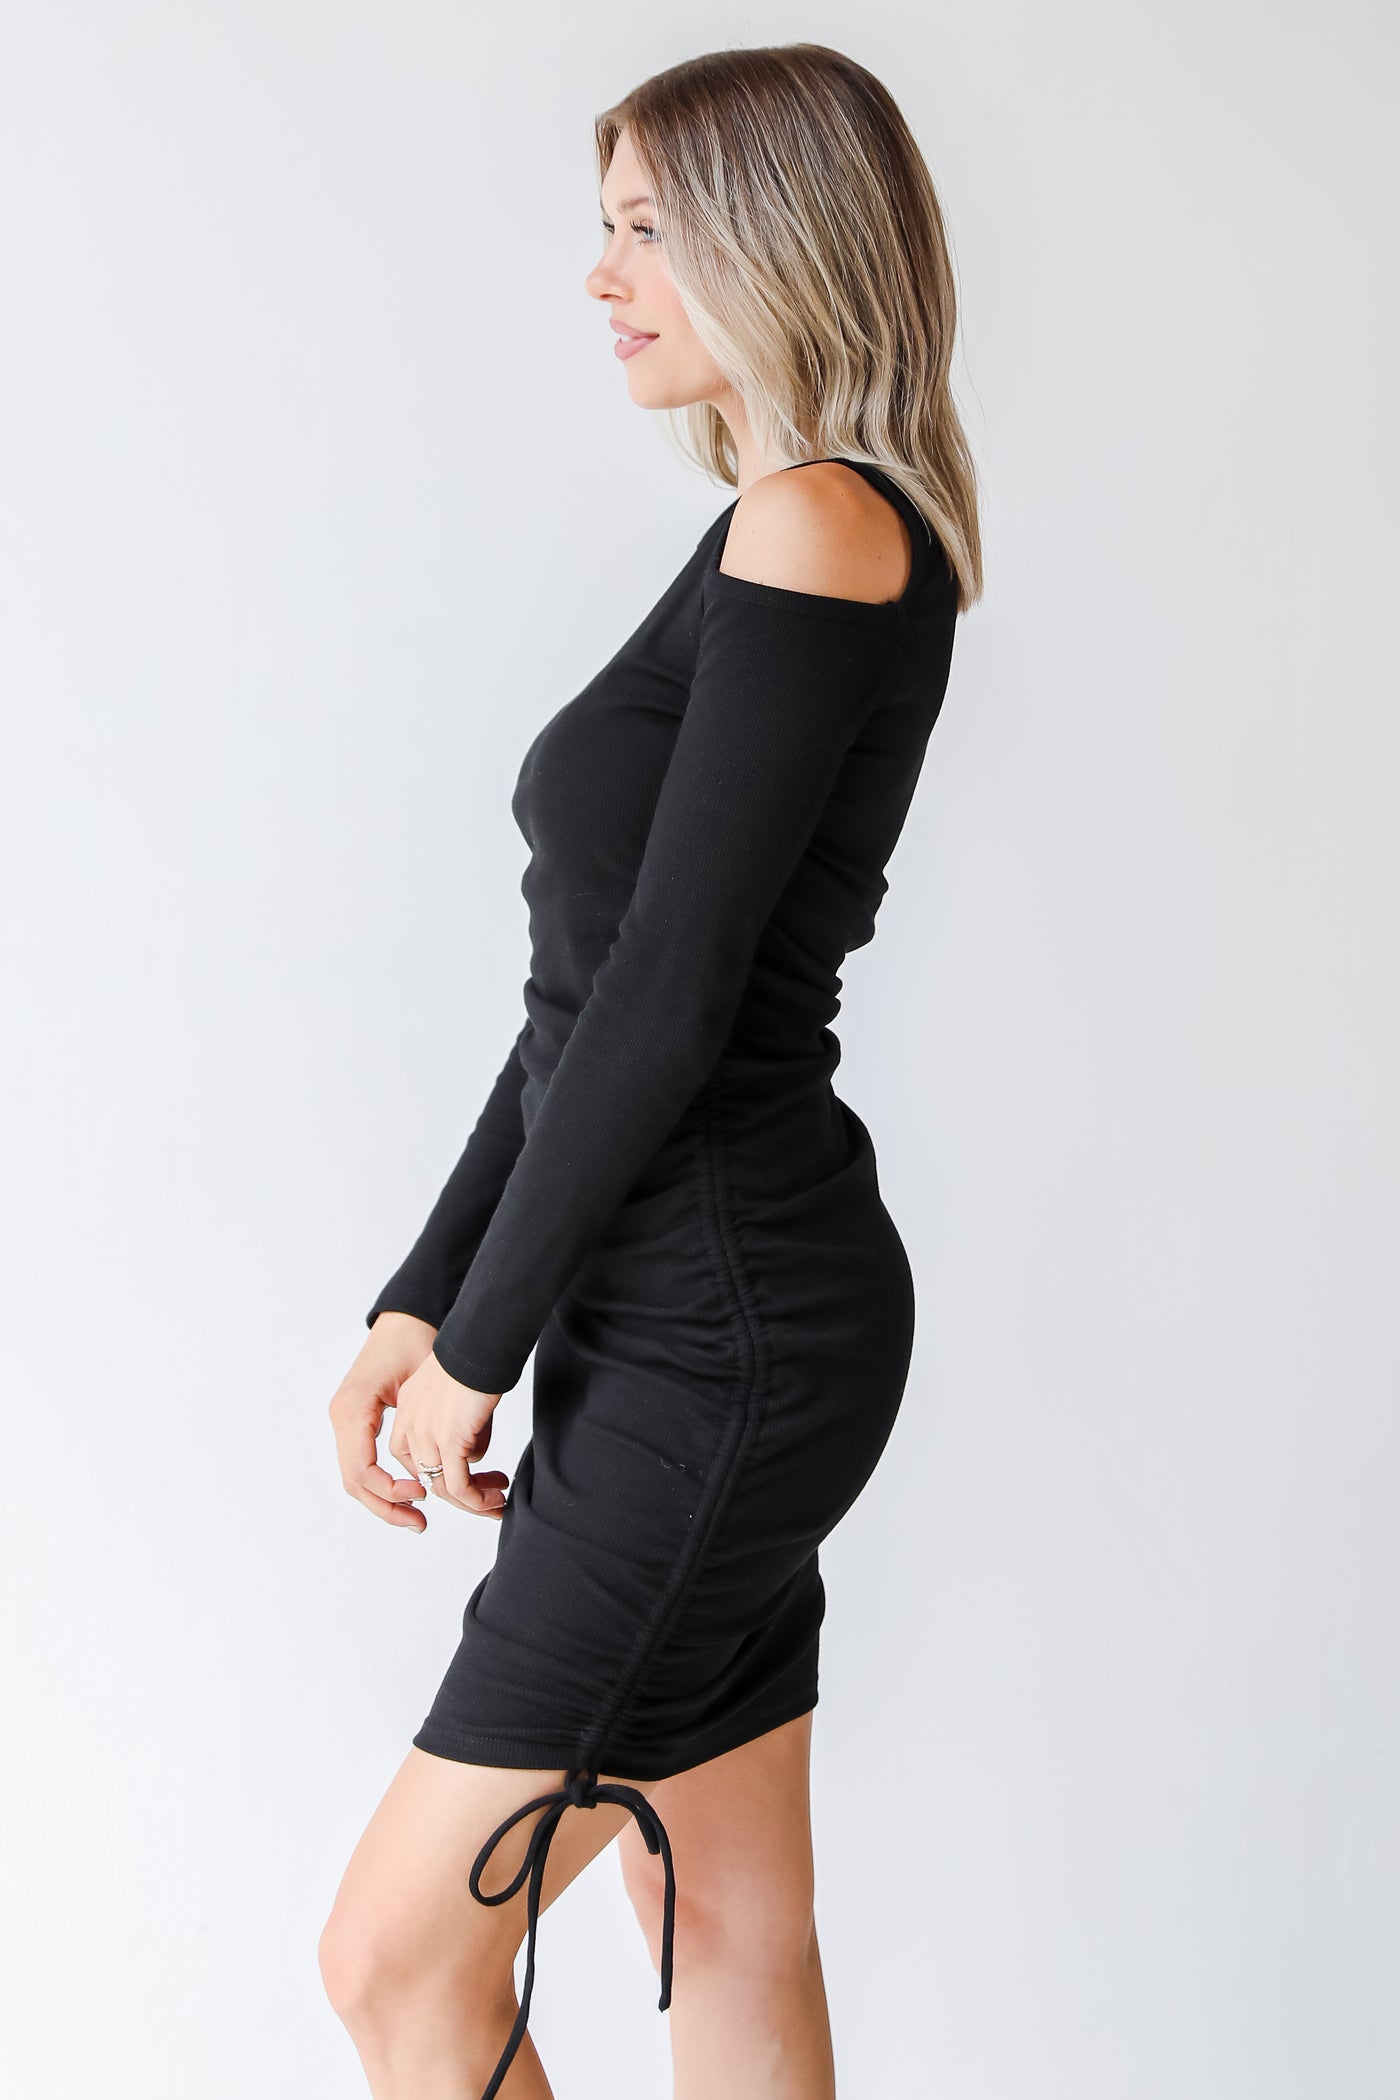 black ruched dress side view